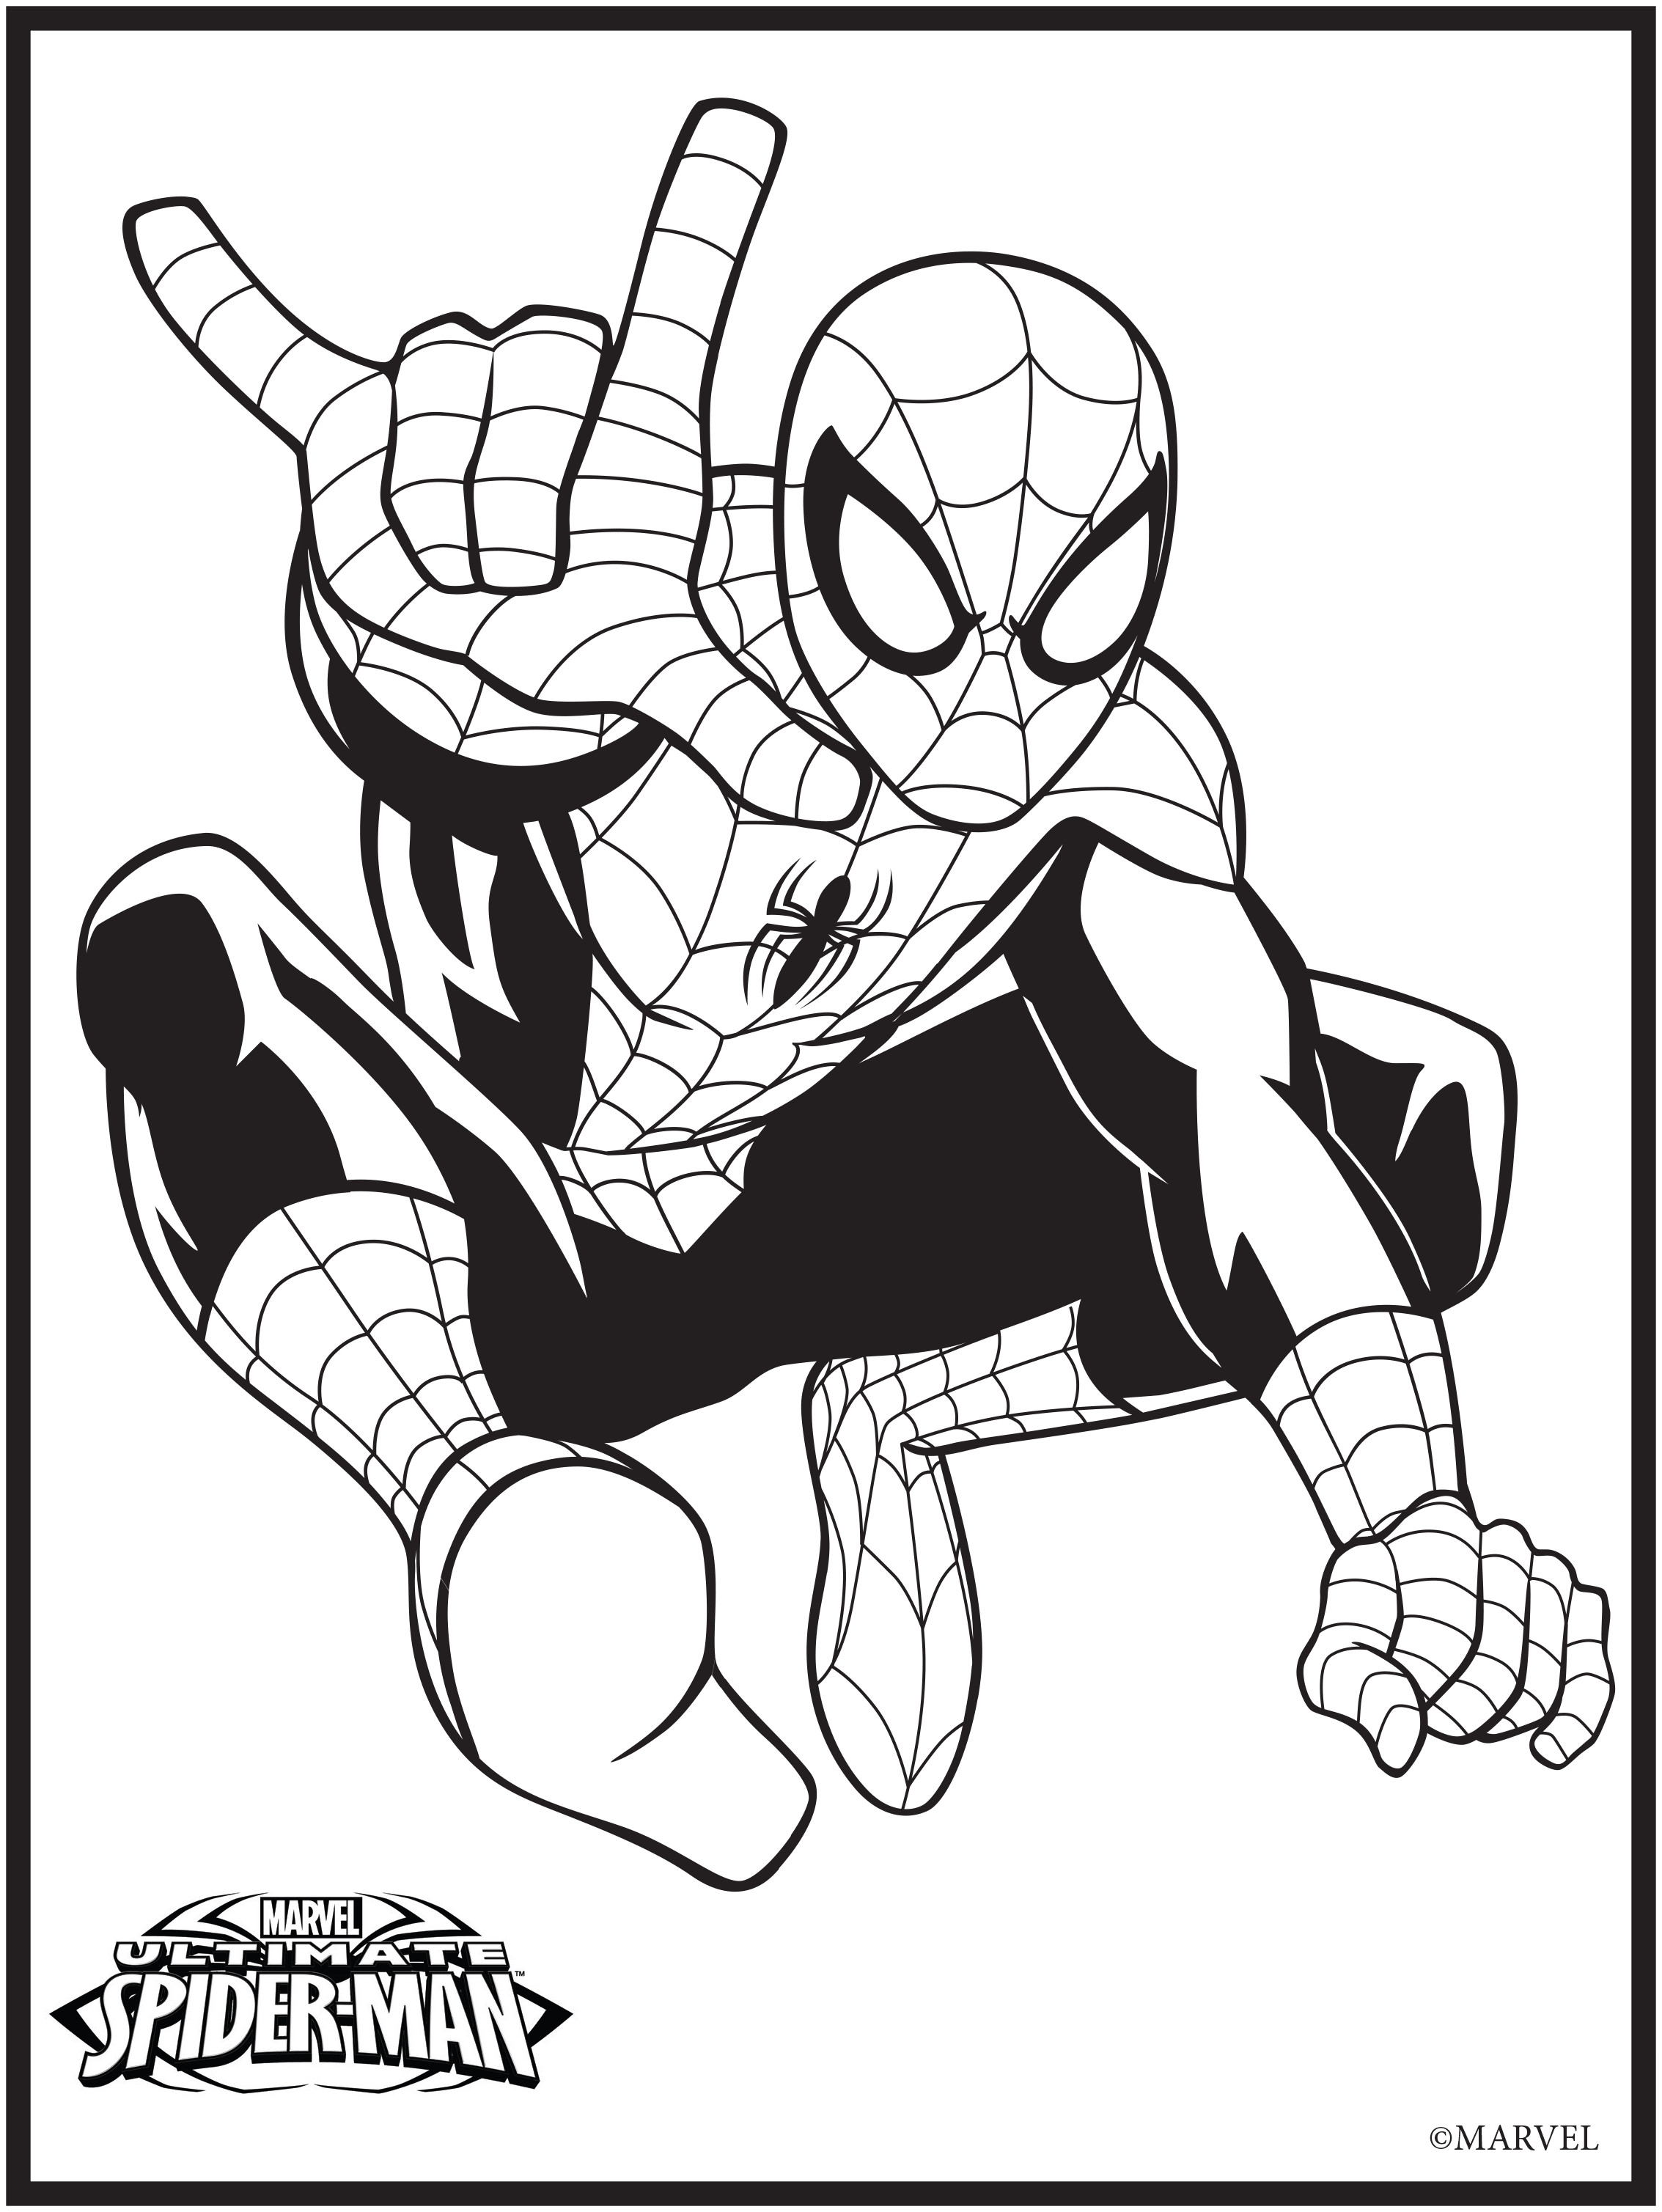 Marvel Superhero Coloring Pages
 Free Printable Marvel Superhero Coloring Pages free